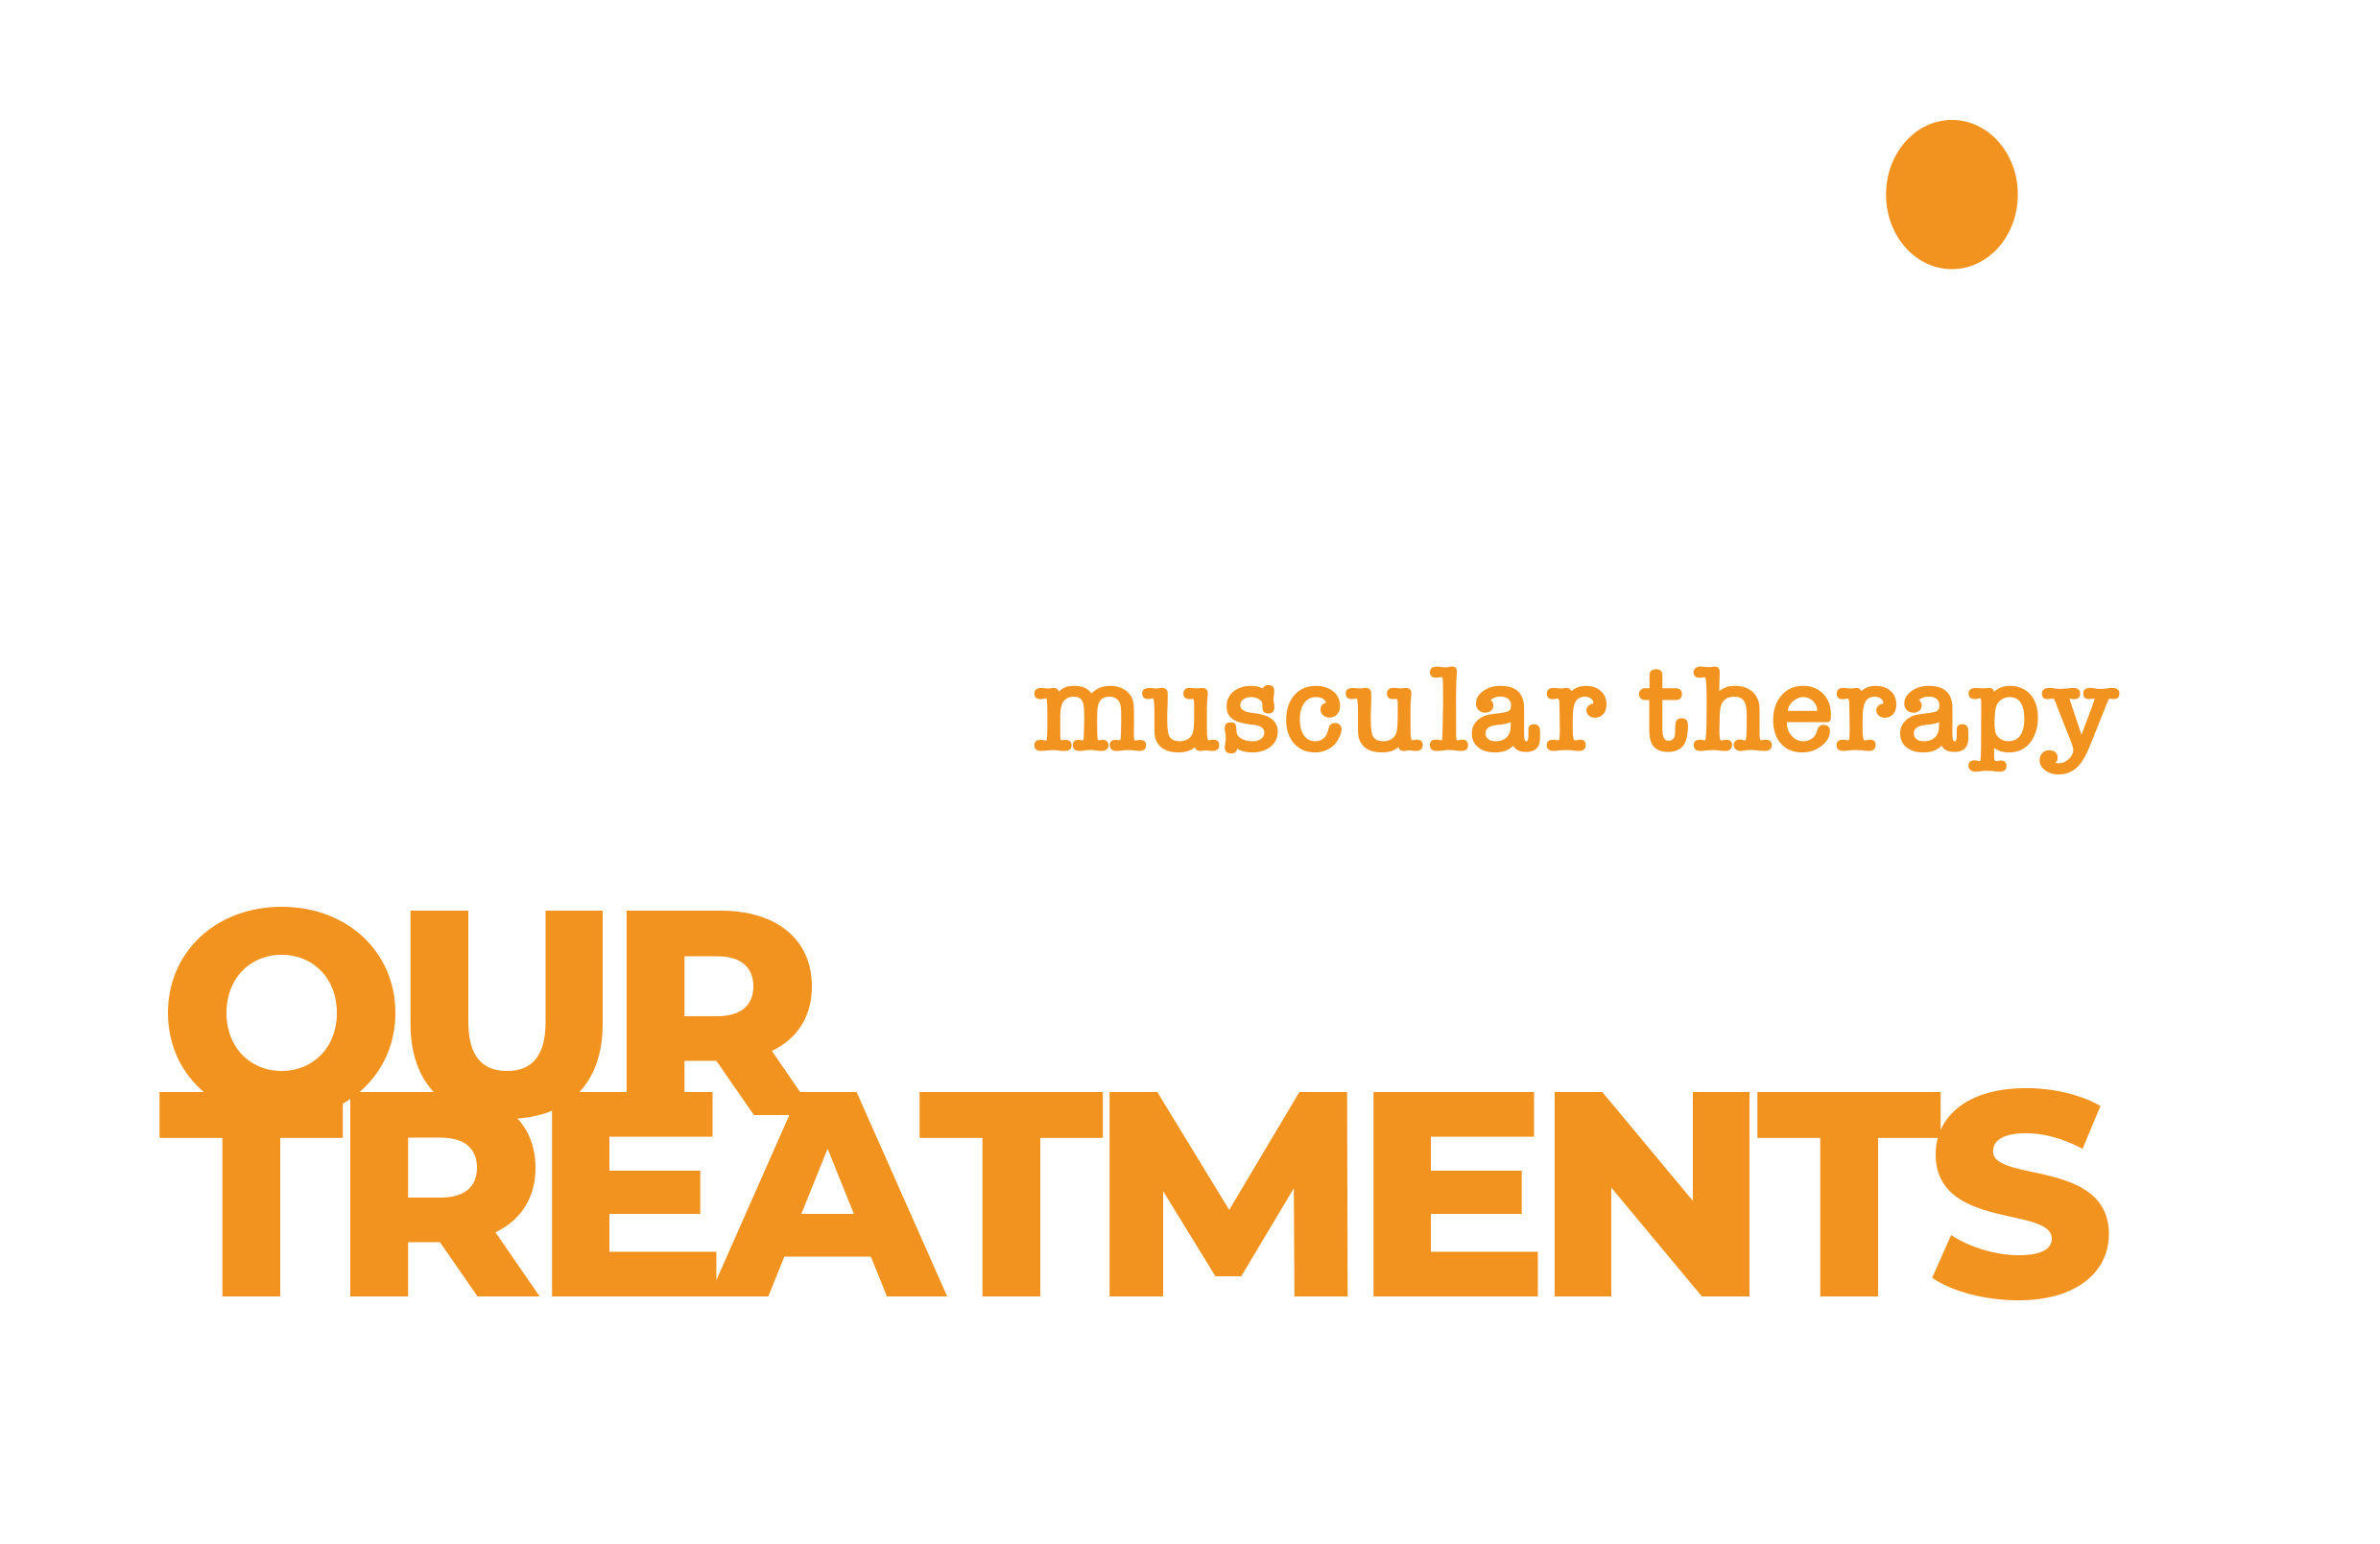 Impax Muscular Therapy logo